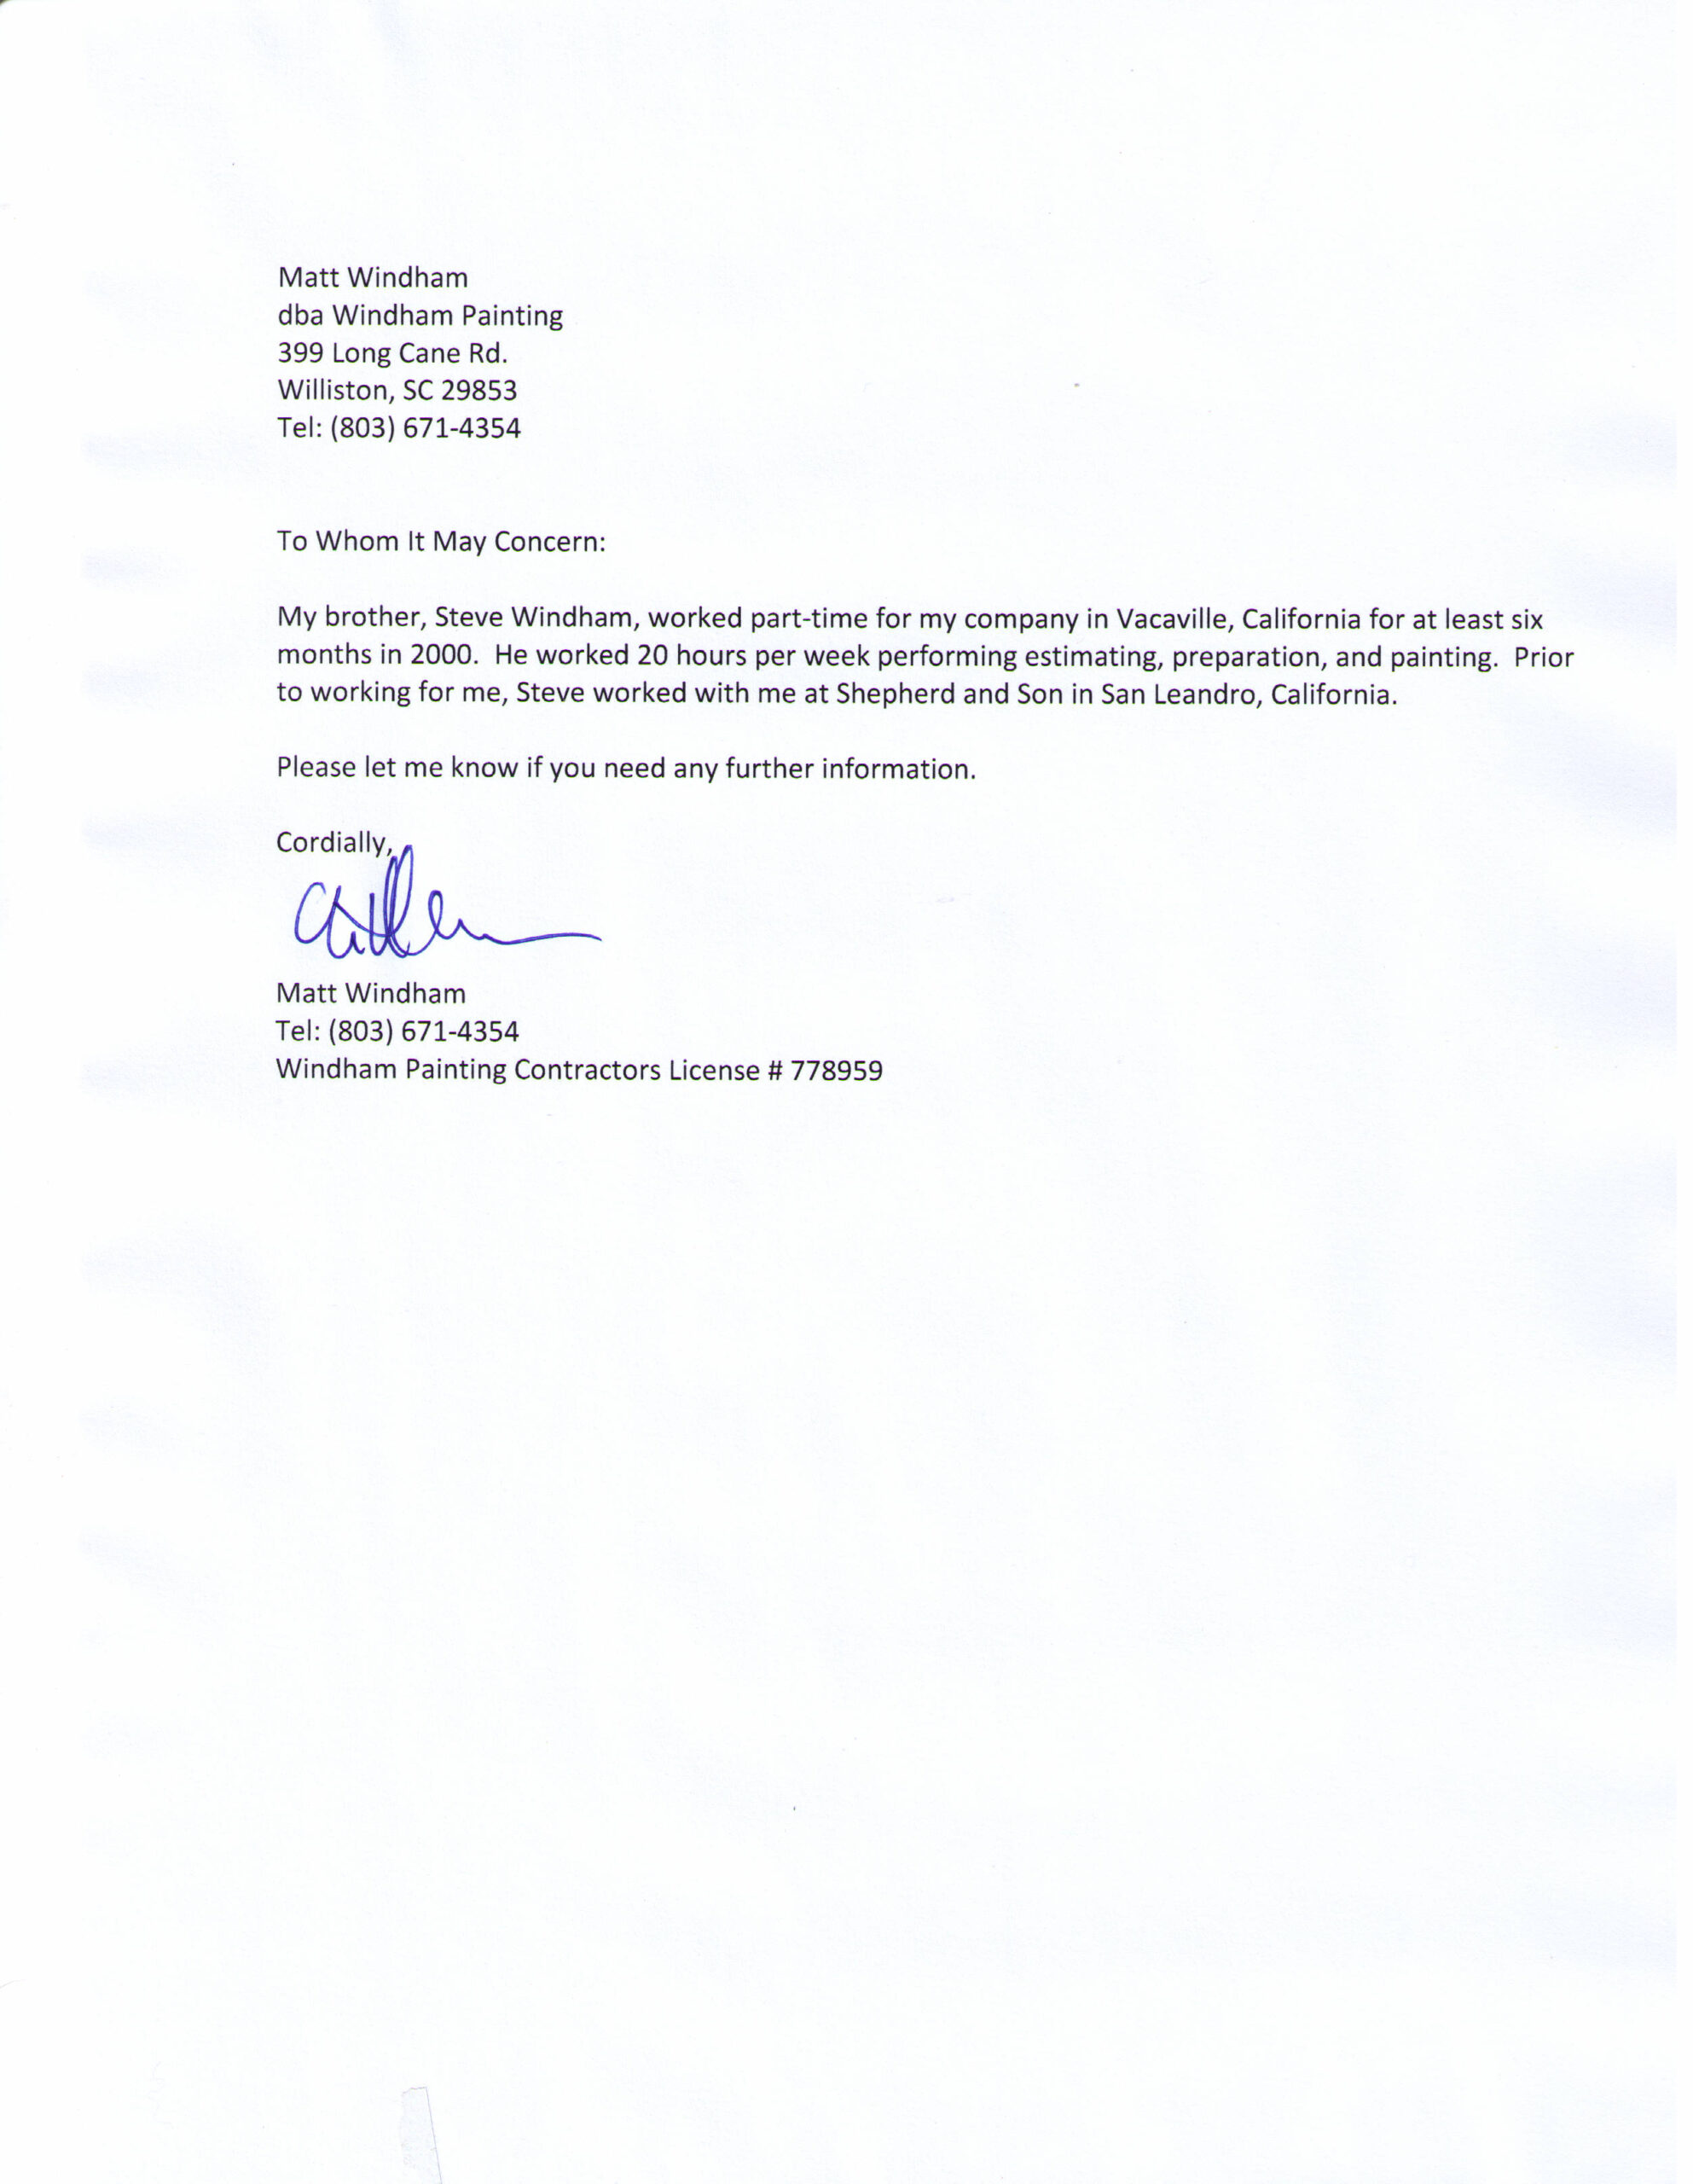 Windham Painting Employment Letter 11-25-2012